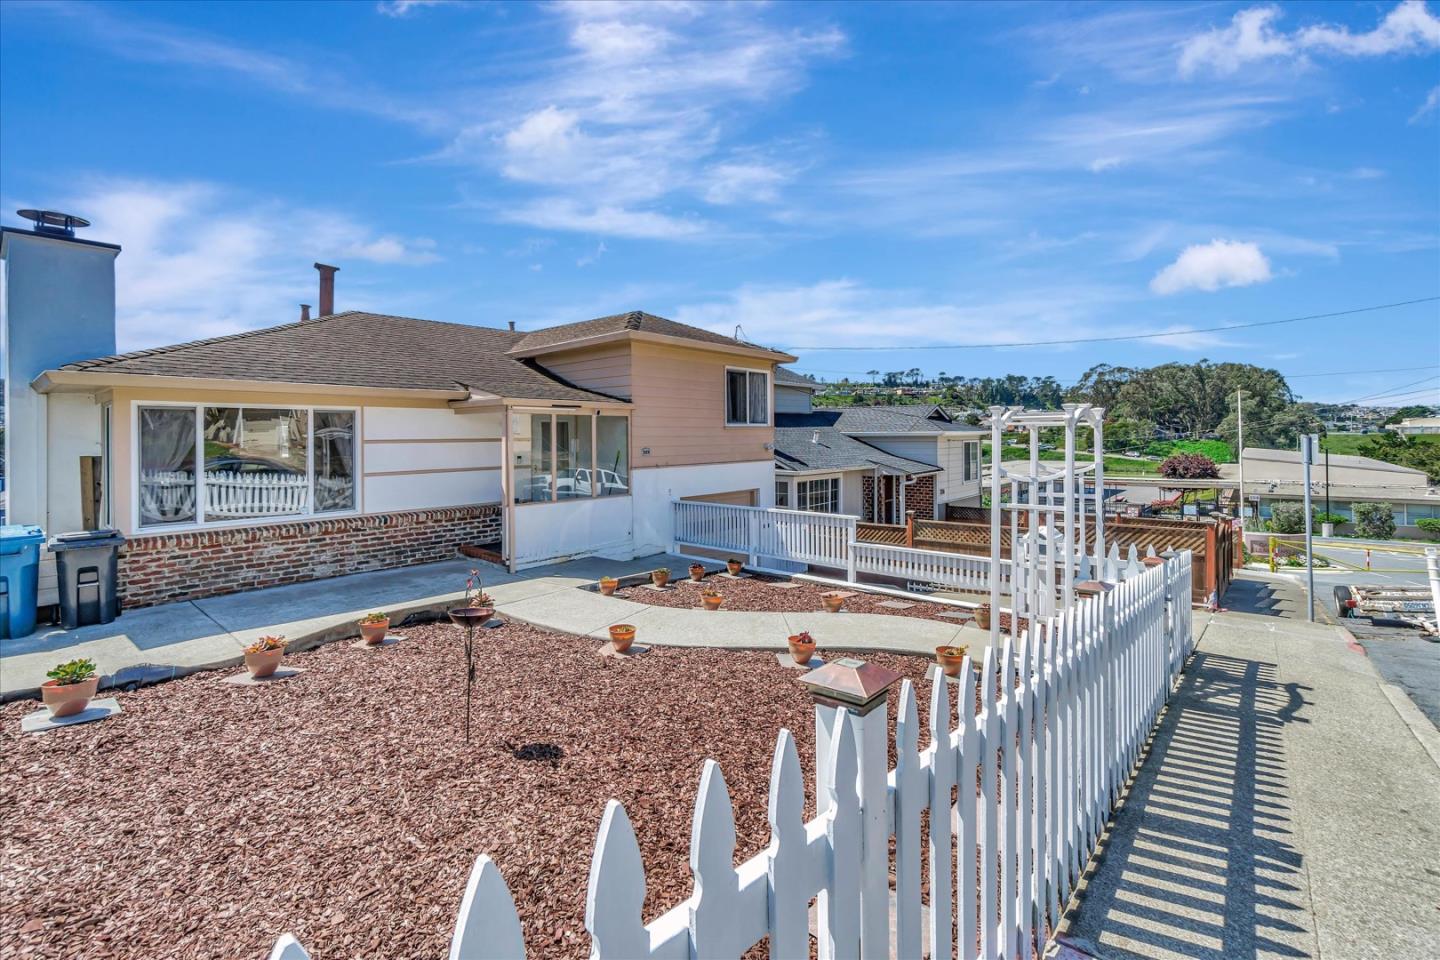 Photo of 204 Garden Ln in Daly City, CA